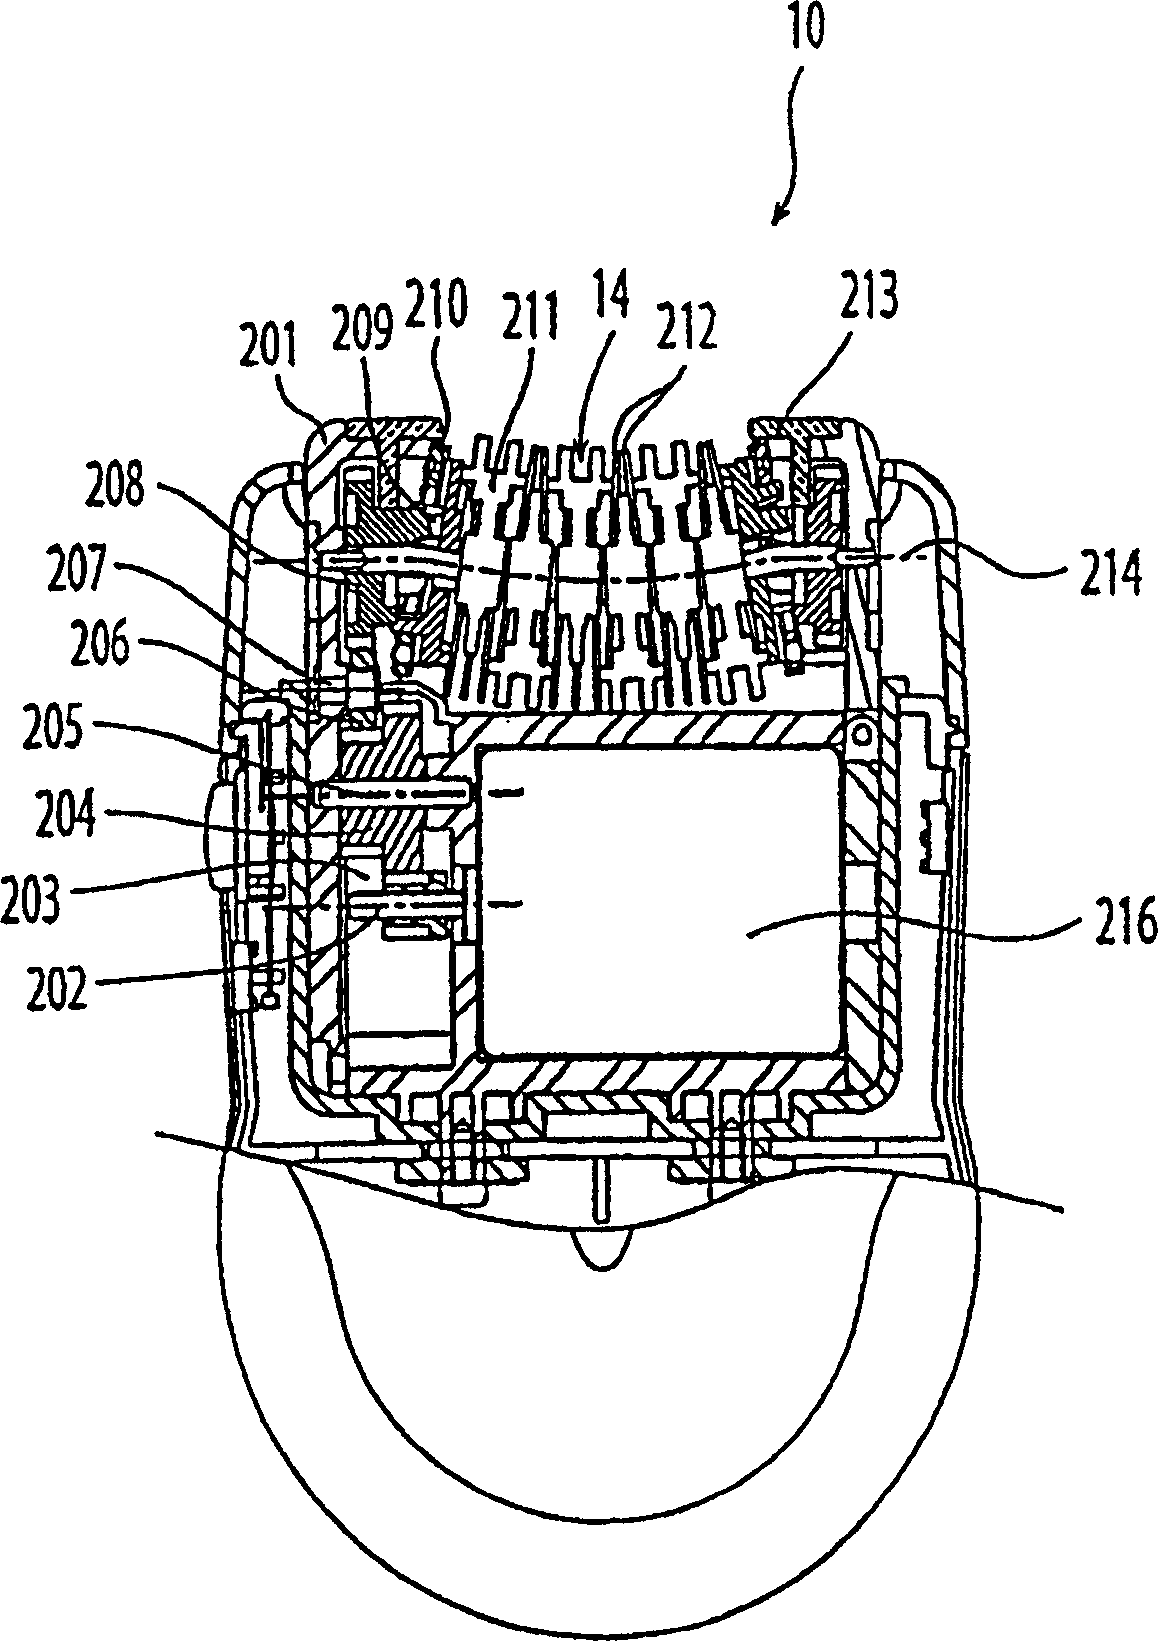 Hair removal device with disc assembly